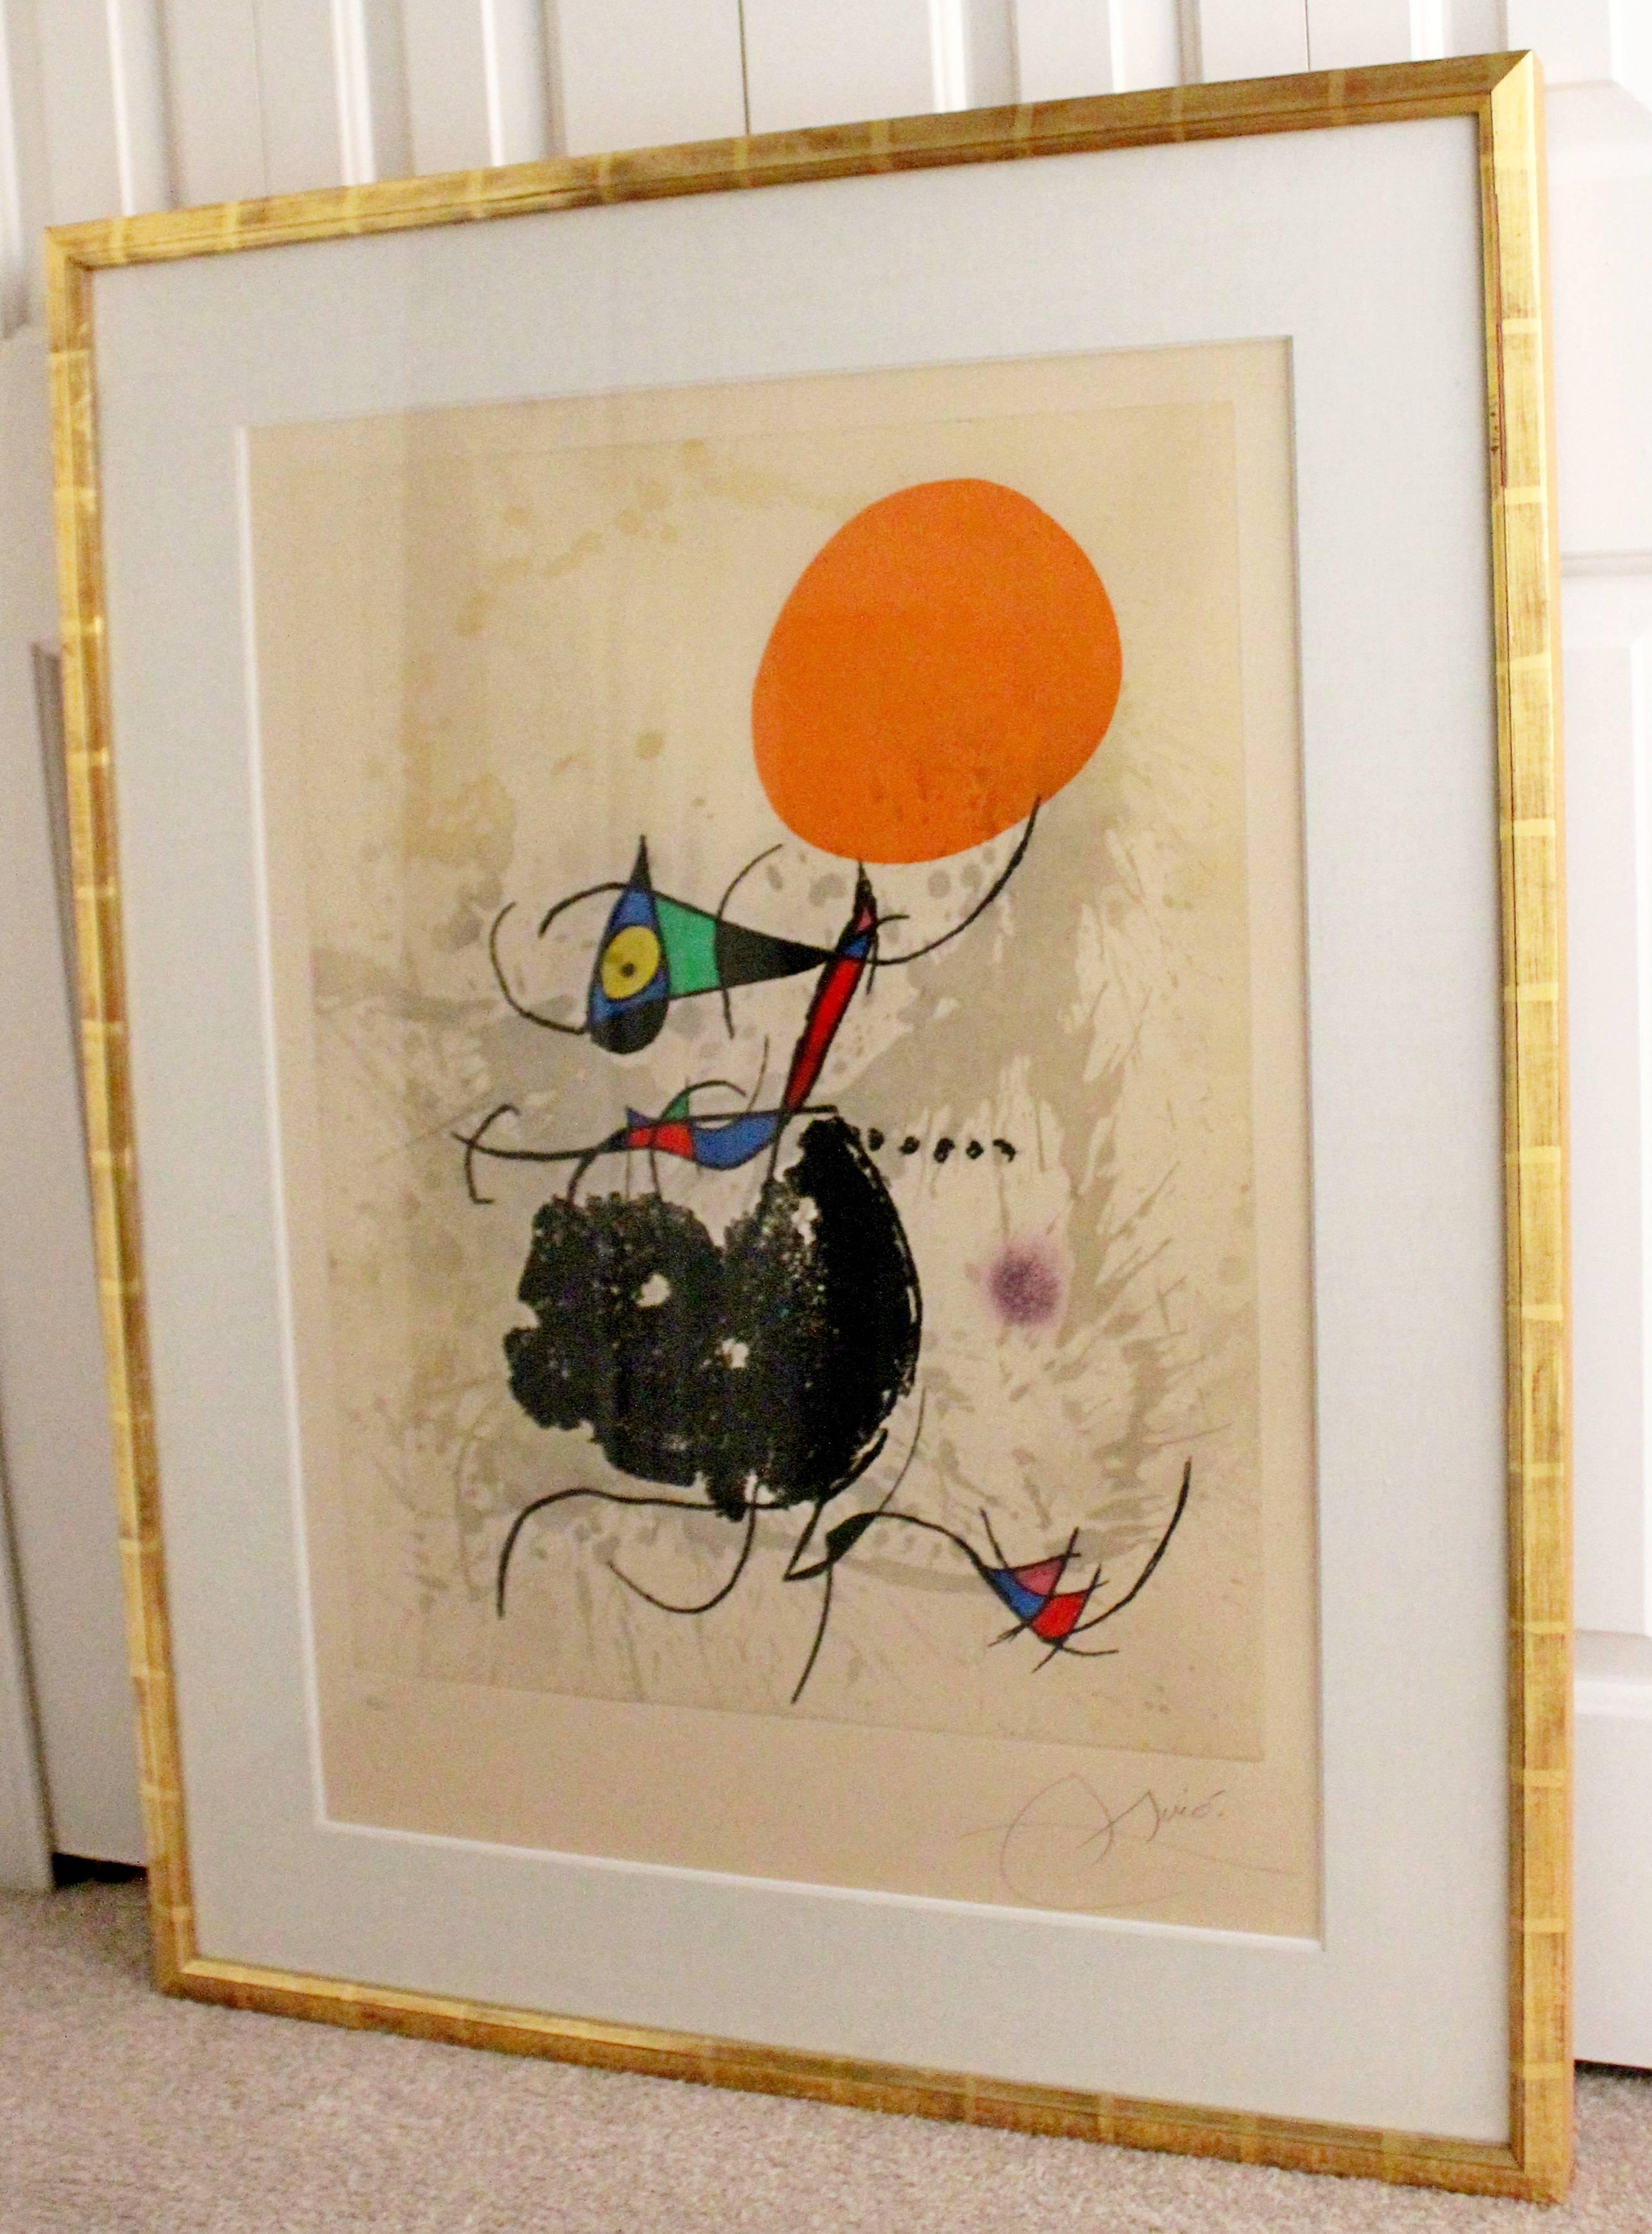 For your consideration is a stunning, signed color etching and aquatint numbered 16/50, circa the 1970s. Titled Terre Atteinte Et Soleil Intact, 1973. Comes with a COA from Detroit Fine Art Appraisers. In excellent condition. The dimensions of the